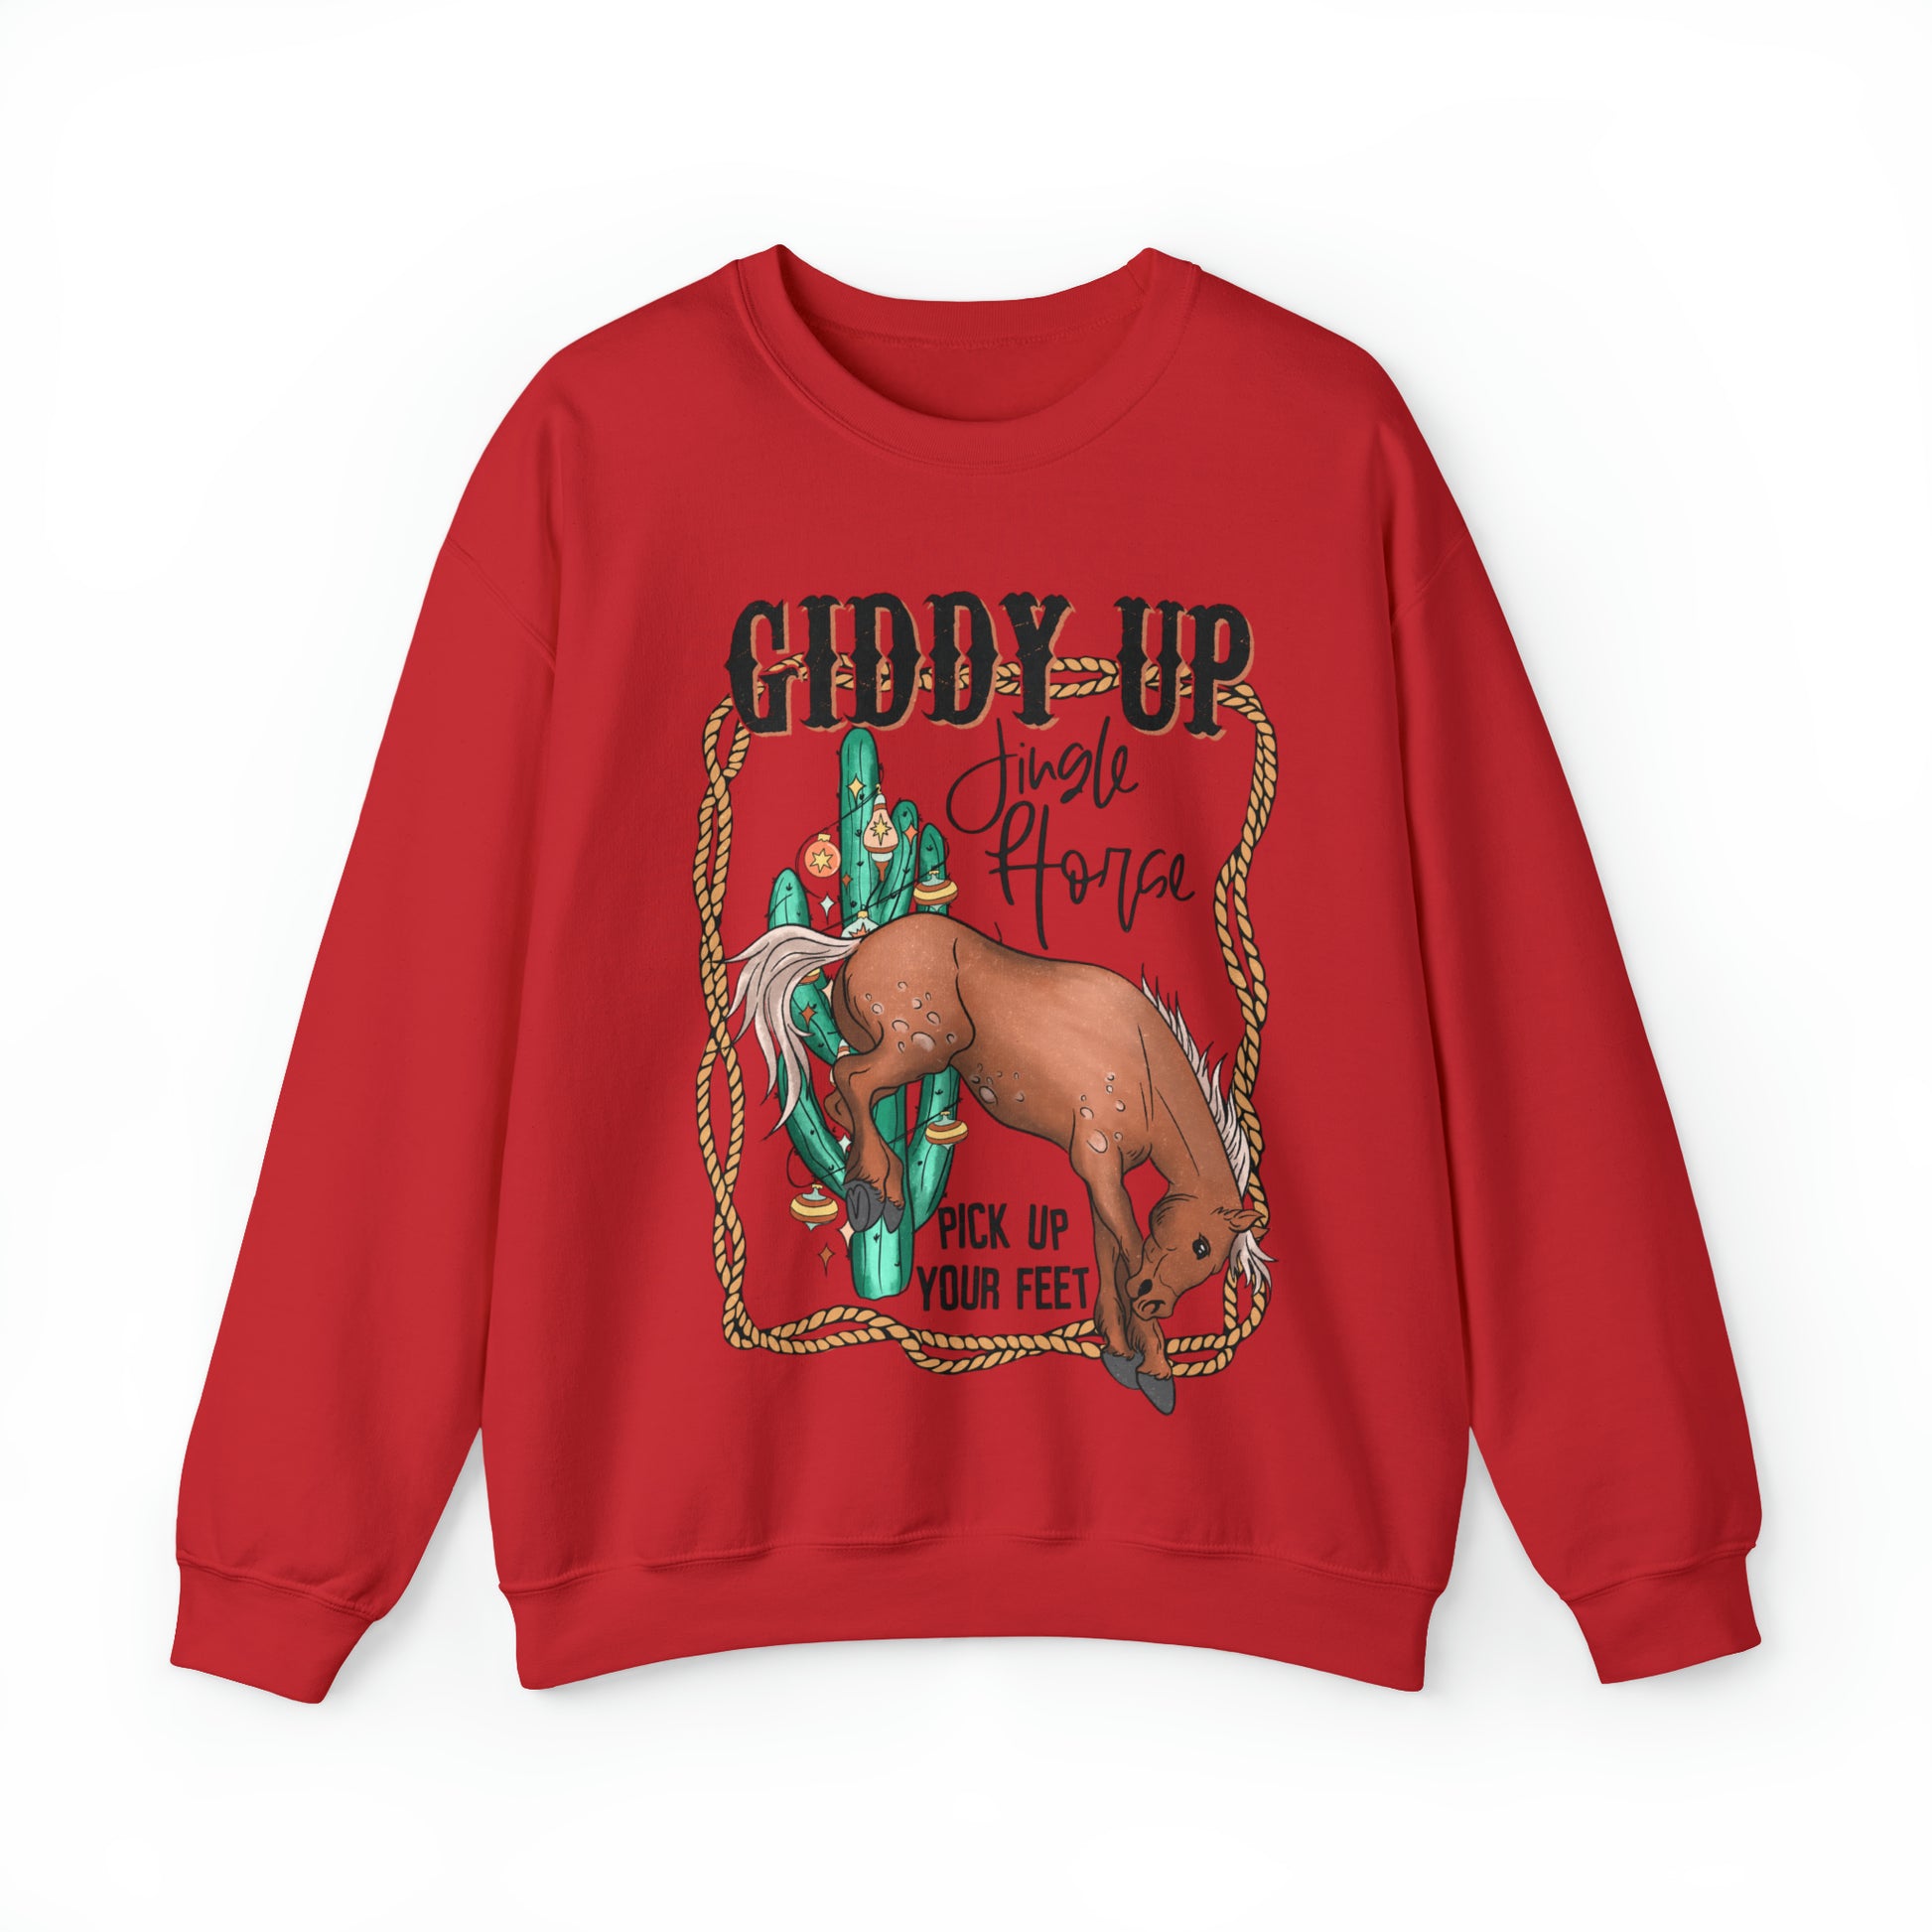 Giddy UP Western Themed Christmas Sweater